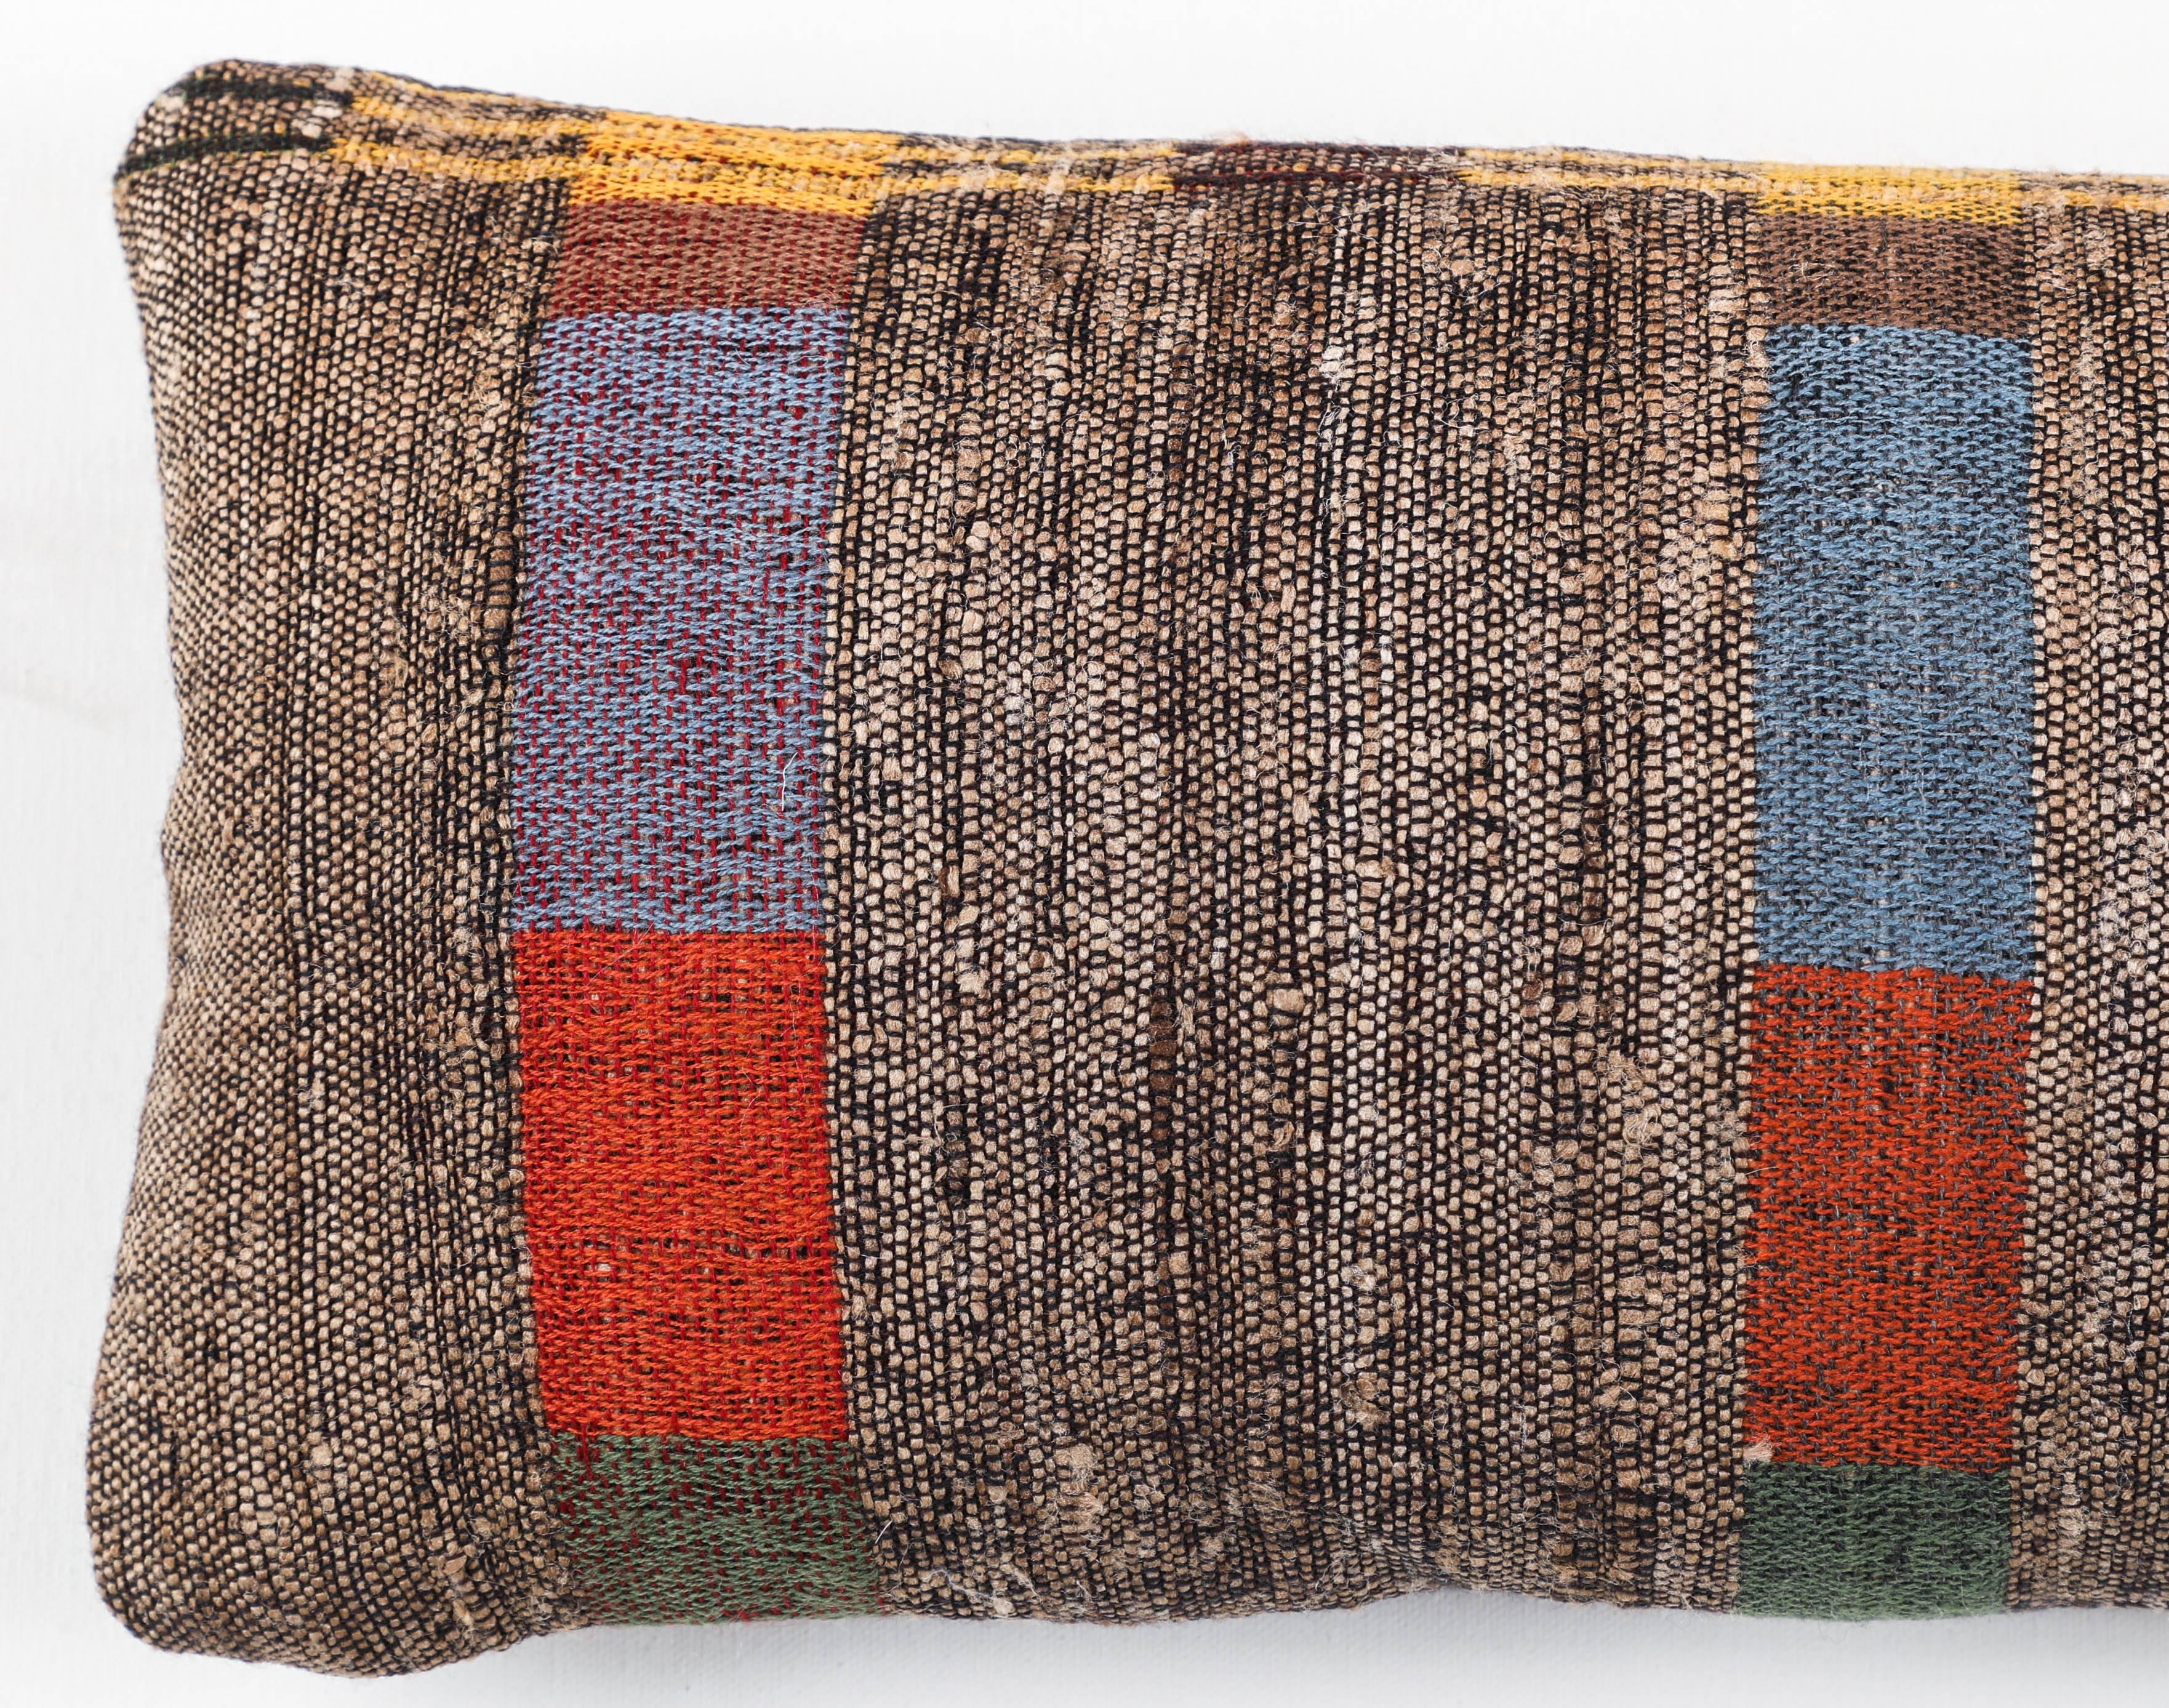 Pat McGann Workshop
A contemporary line of cushions, pillows, throws, bedcovers, bedspreads and yardage handwoven in India on antique Jacquard looms. Hand-spun wool, cotton, linen and raw silk give the textiles an appealing uneven quality. Sizes